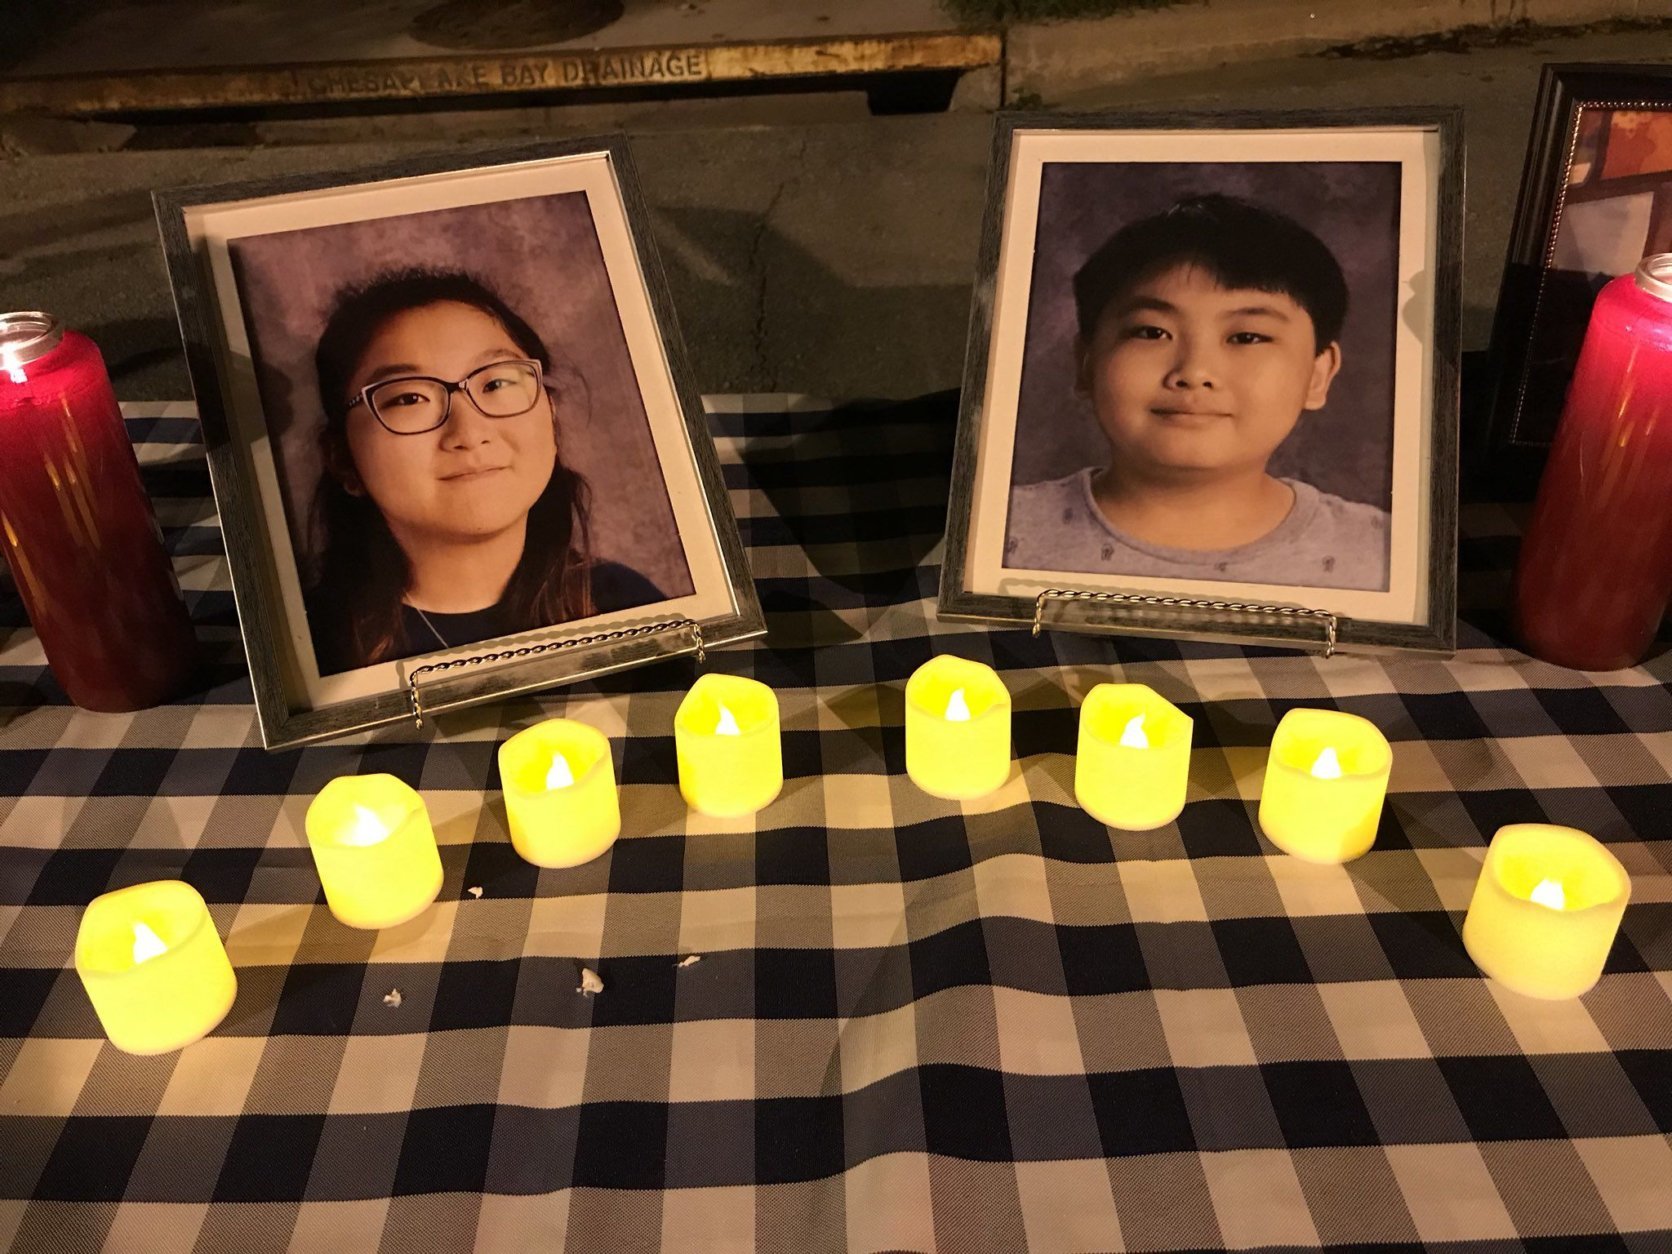 Ten-year-old Andy and 11-year-old Mina Kim are the youngest of four family members who died as a result of what police said was a murder-suicide at their home in the Colesville area. (WTOP/Michelle Basch)